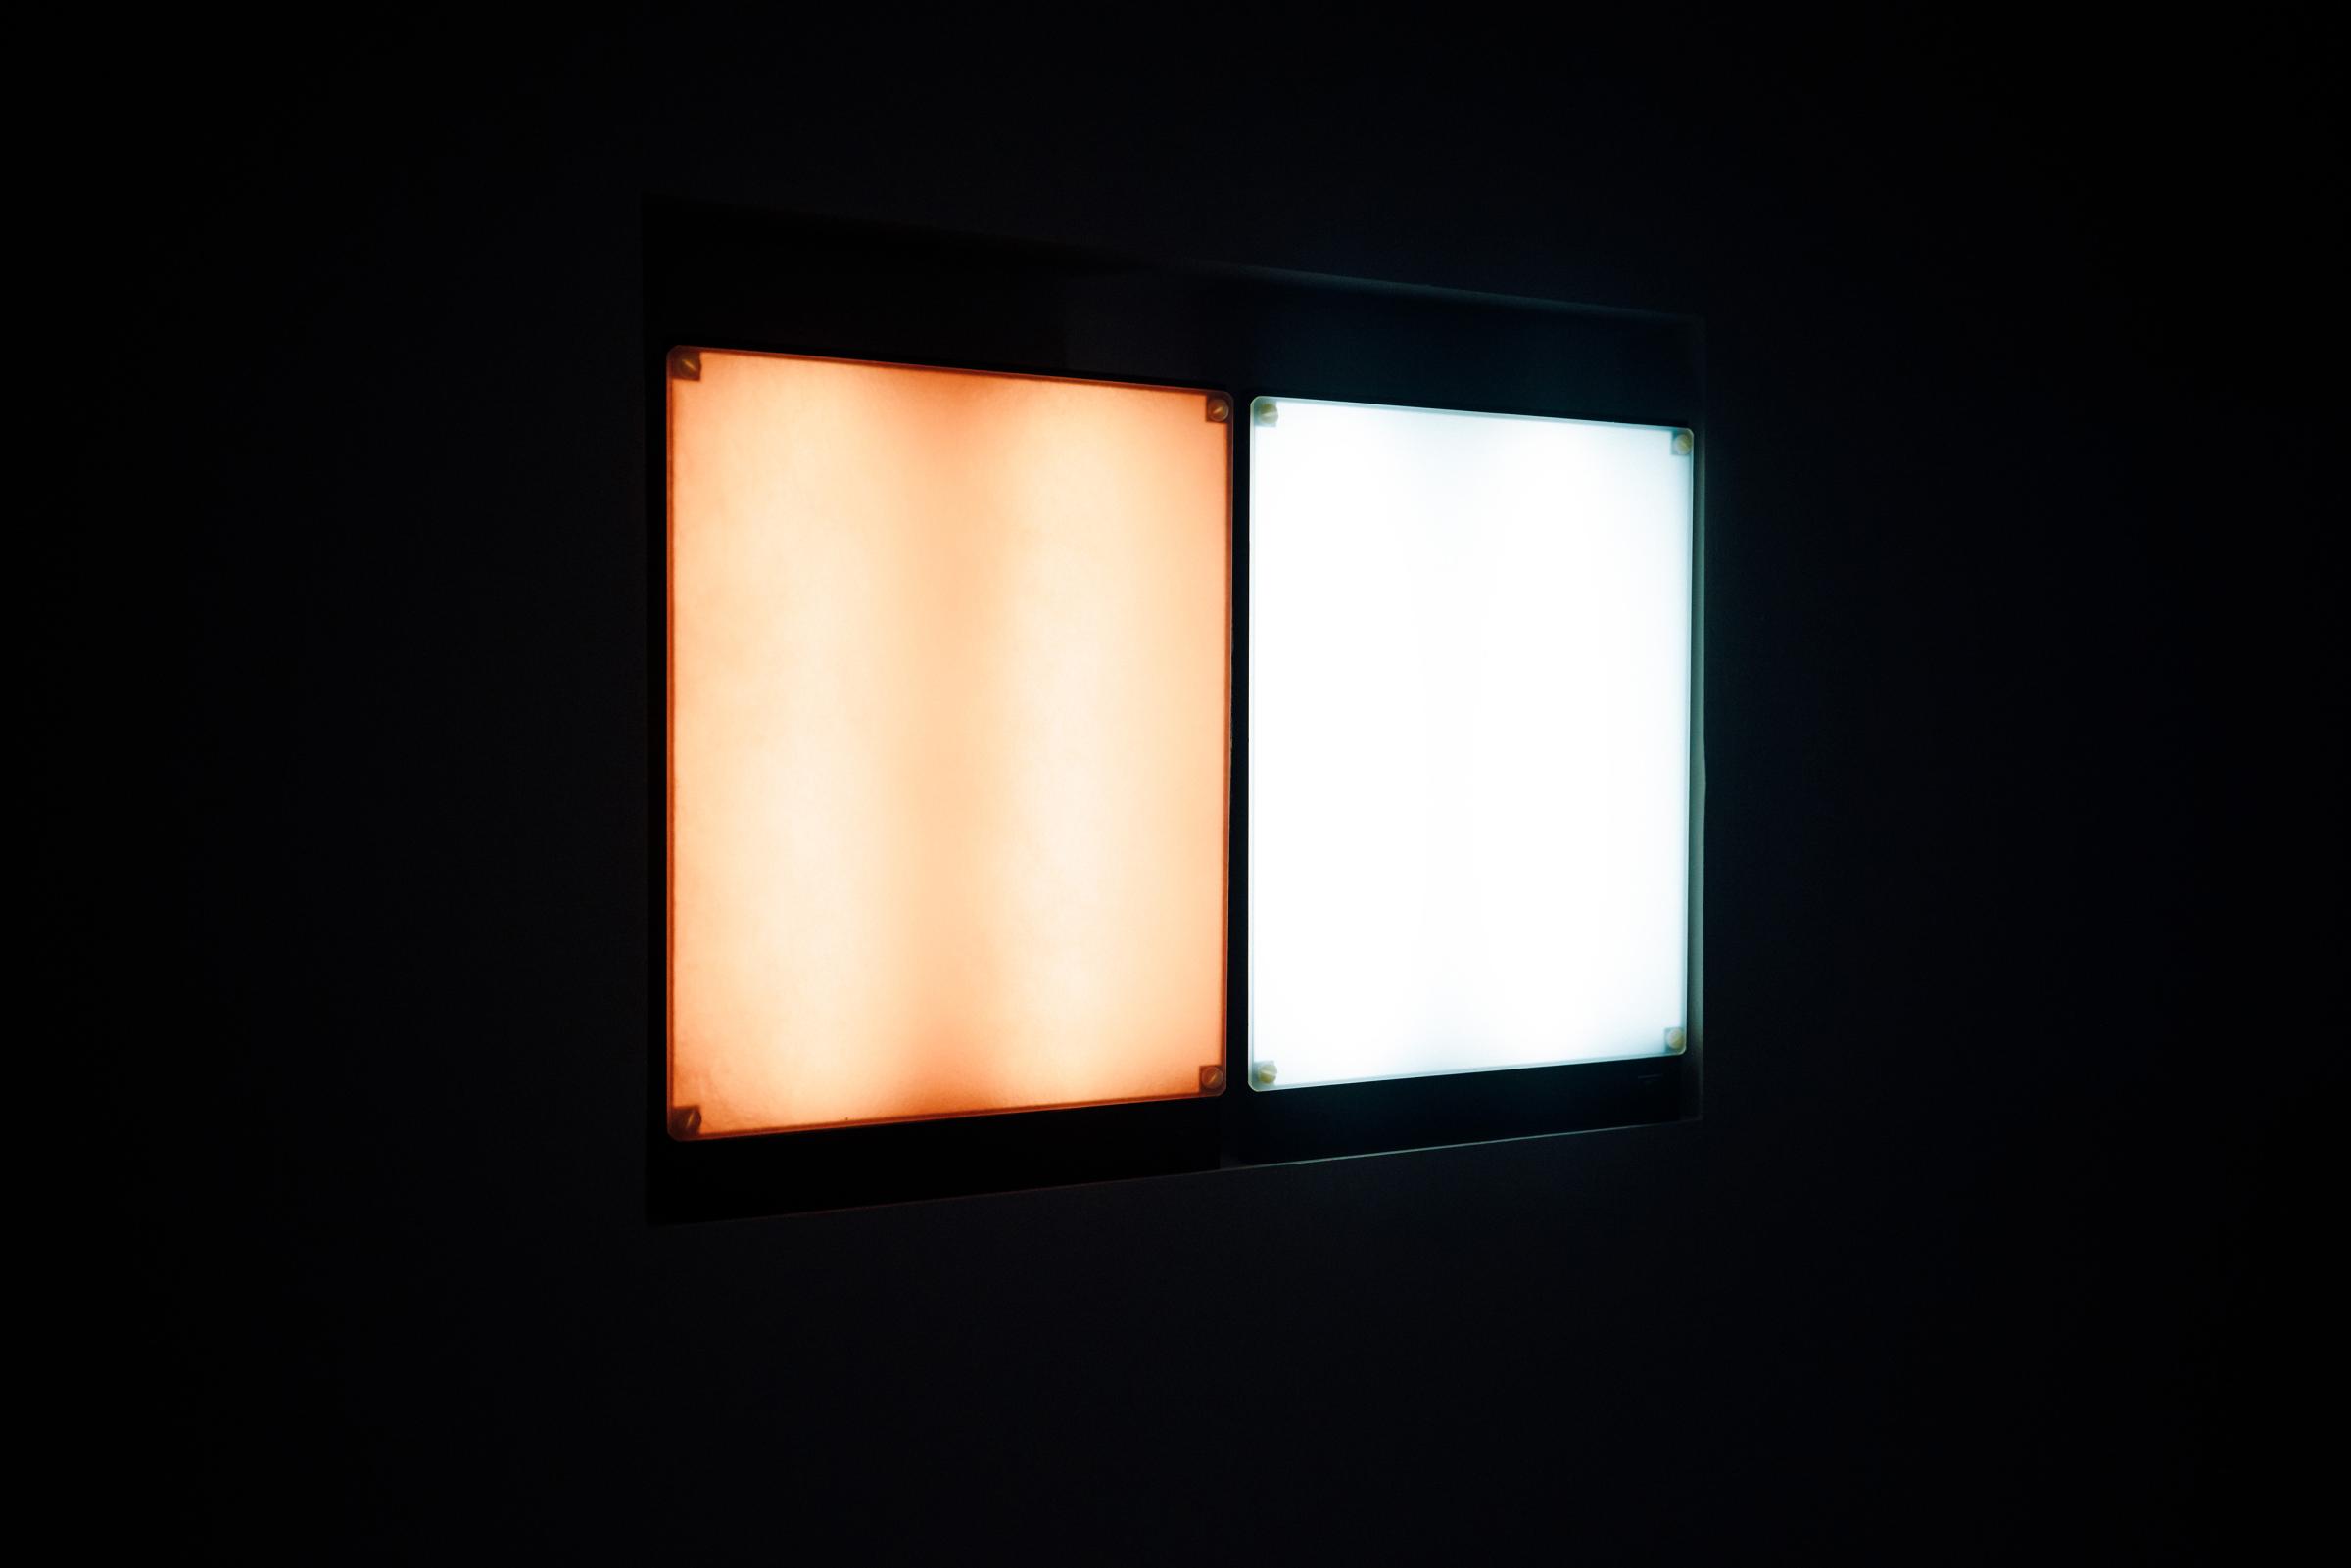 A light box against a dark background. One half is emitting a bright amber glow resembling dawn’s warmer orange light. The other half is a cool white light. 